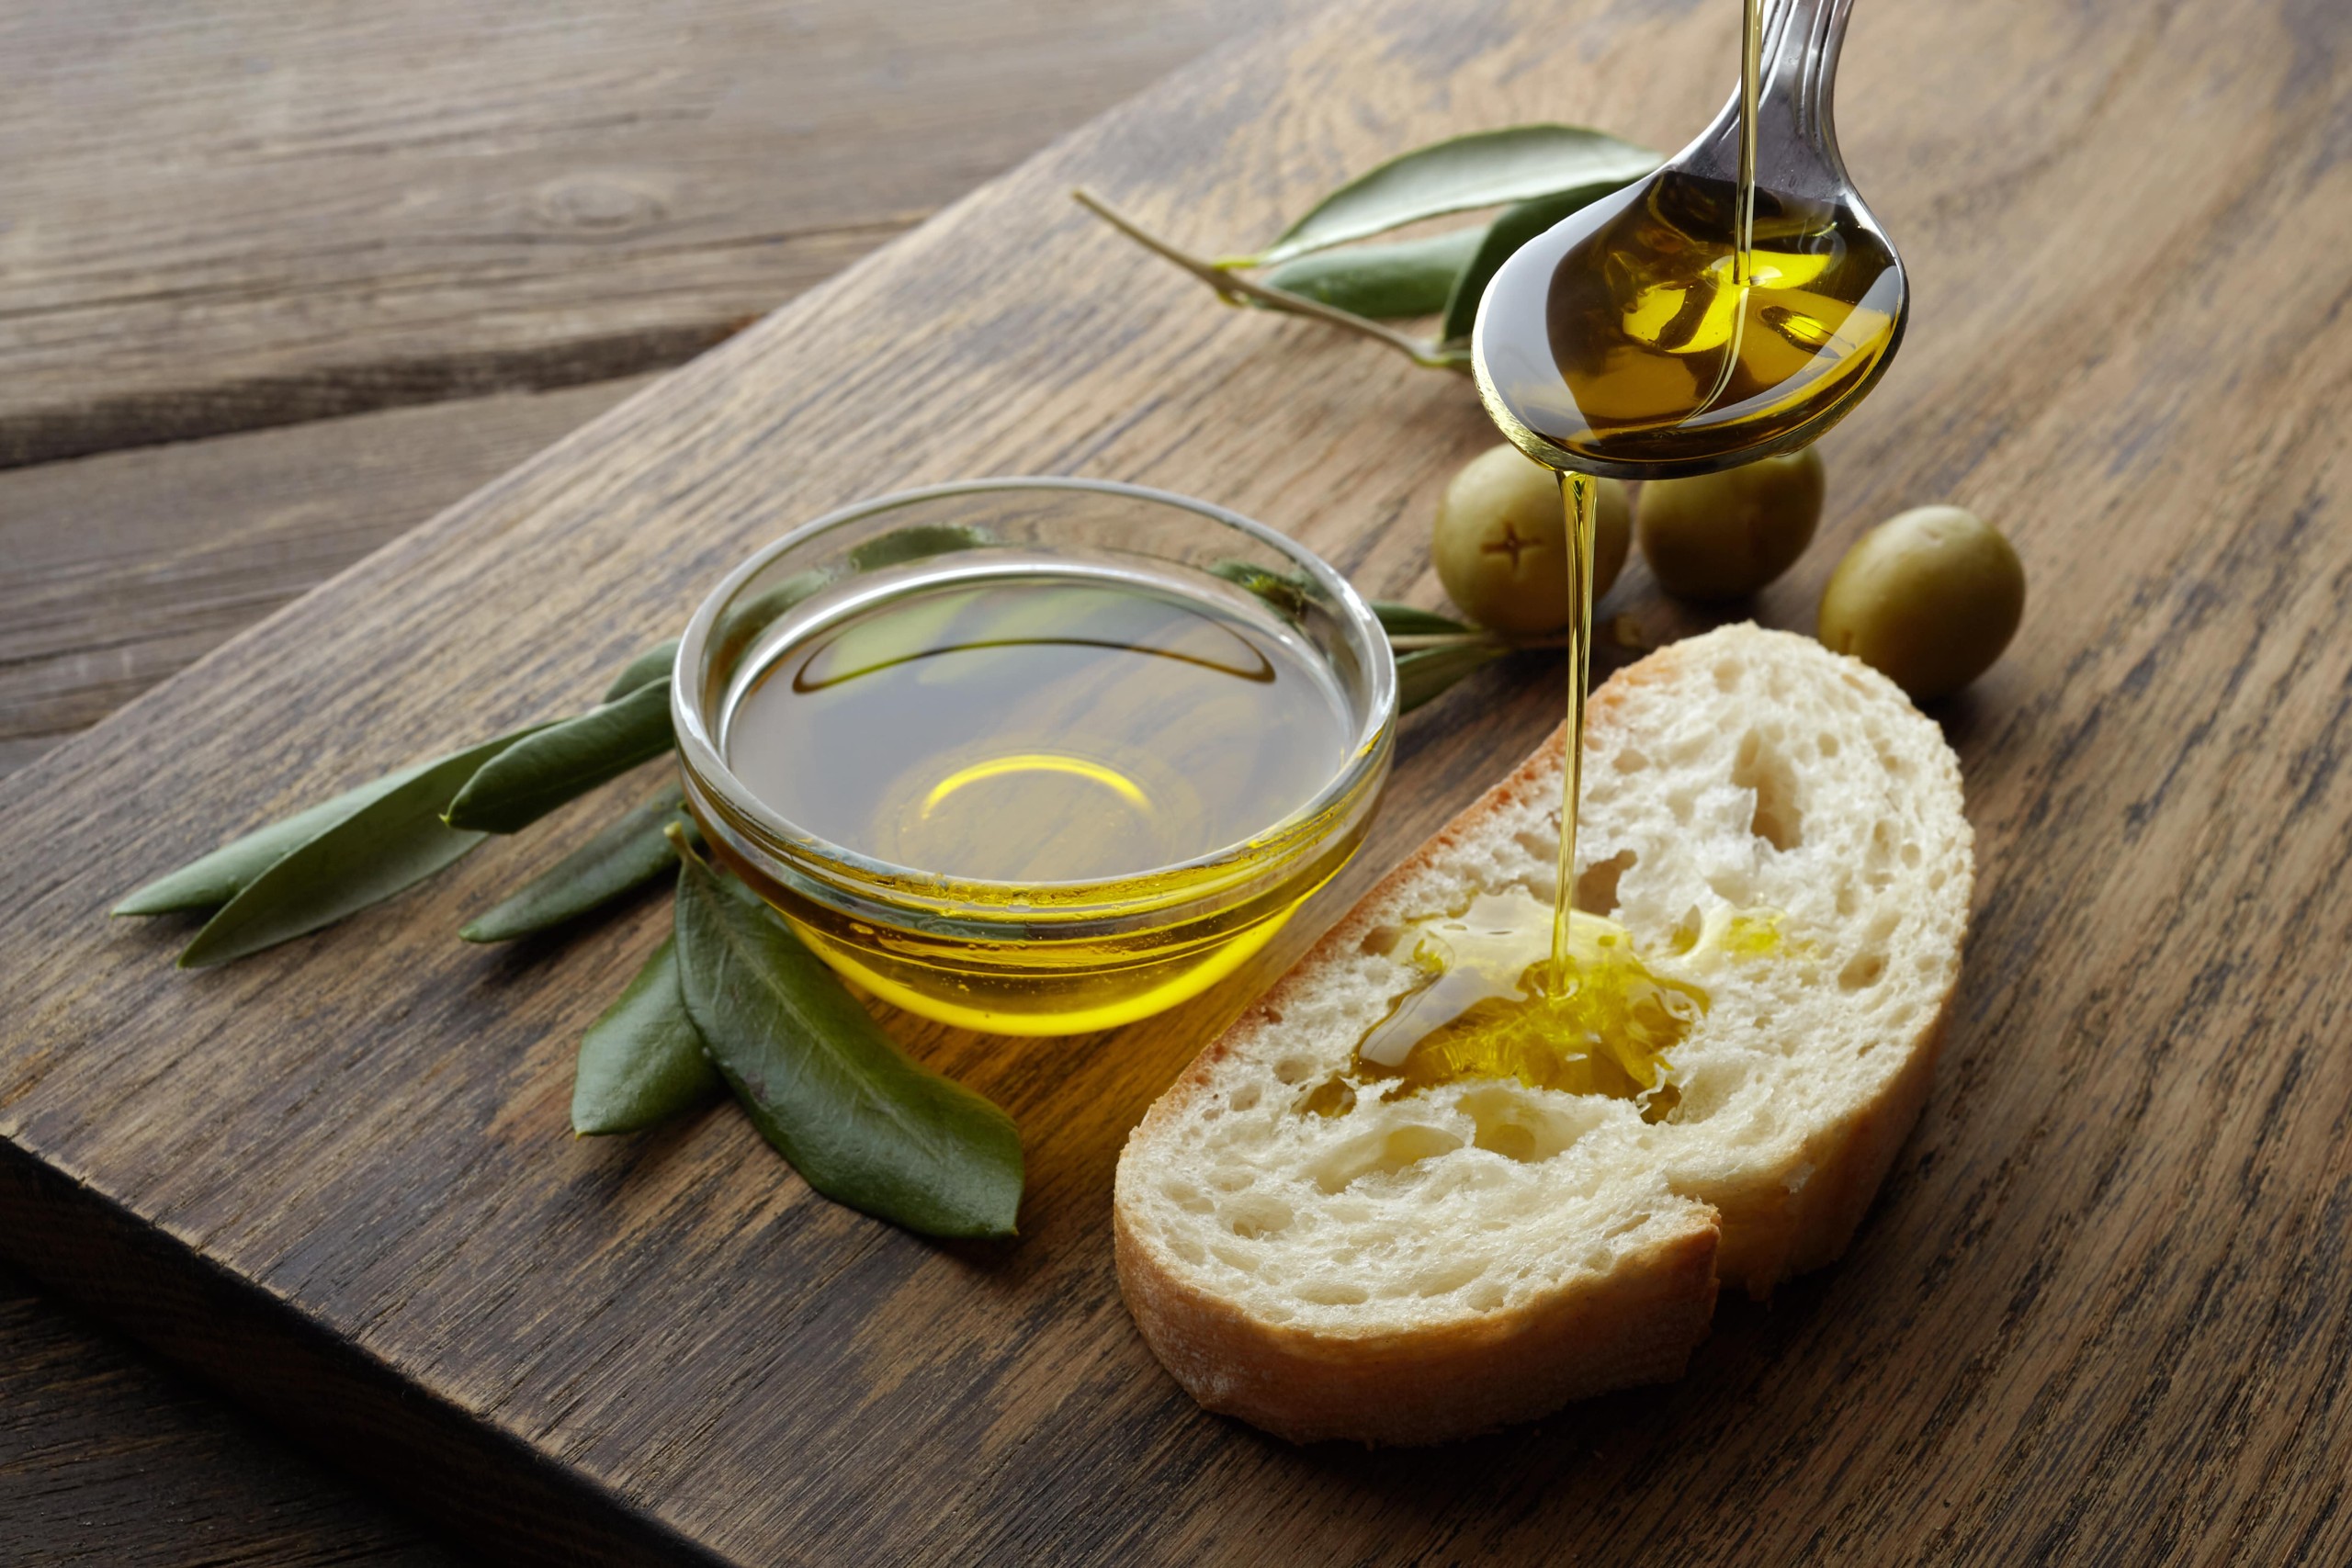 The Place of Olives and Olive Oil in Gastronomy